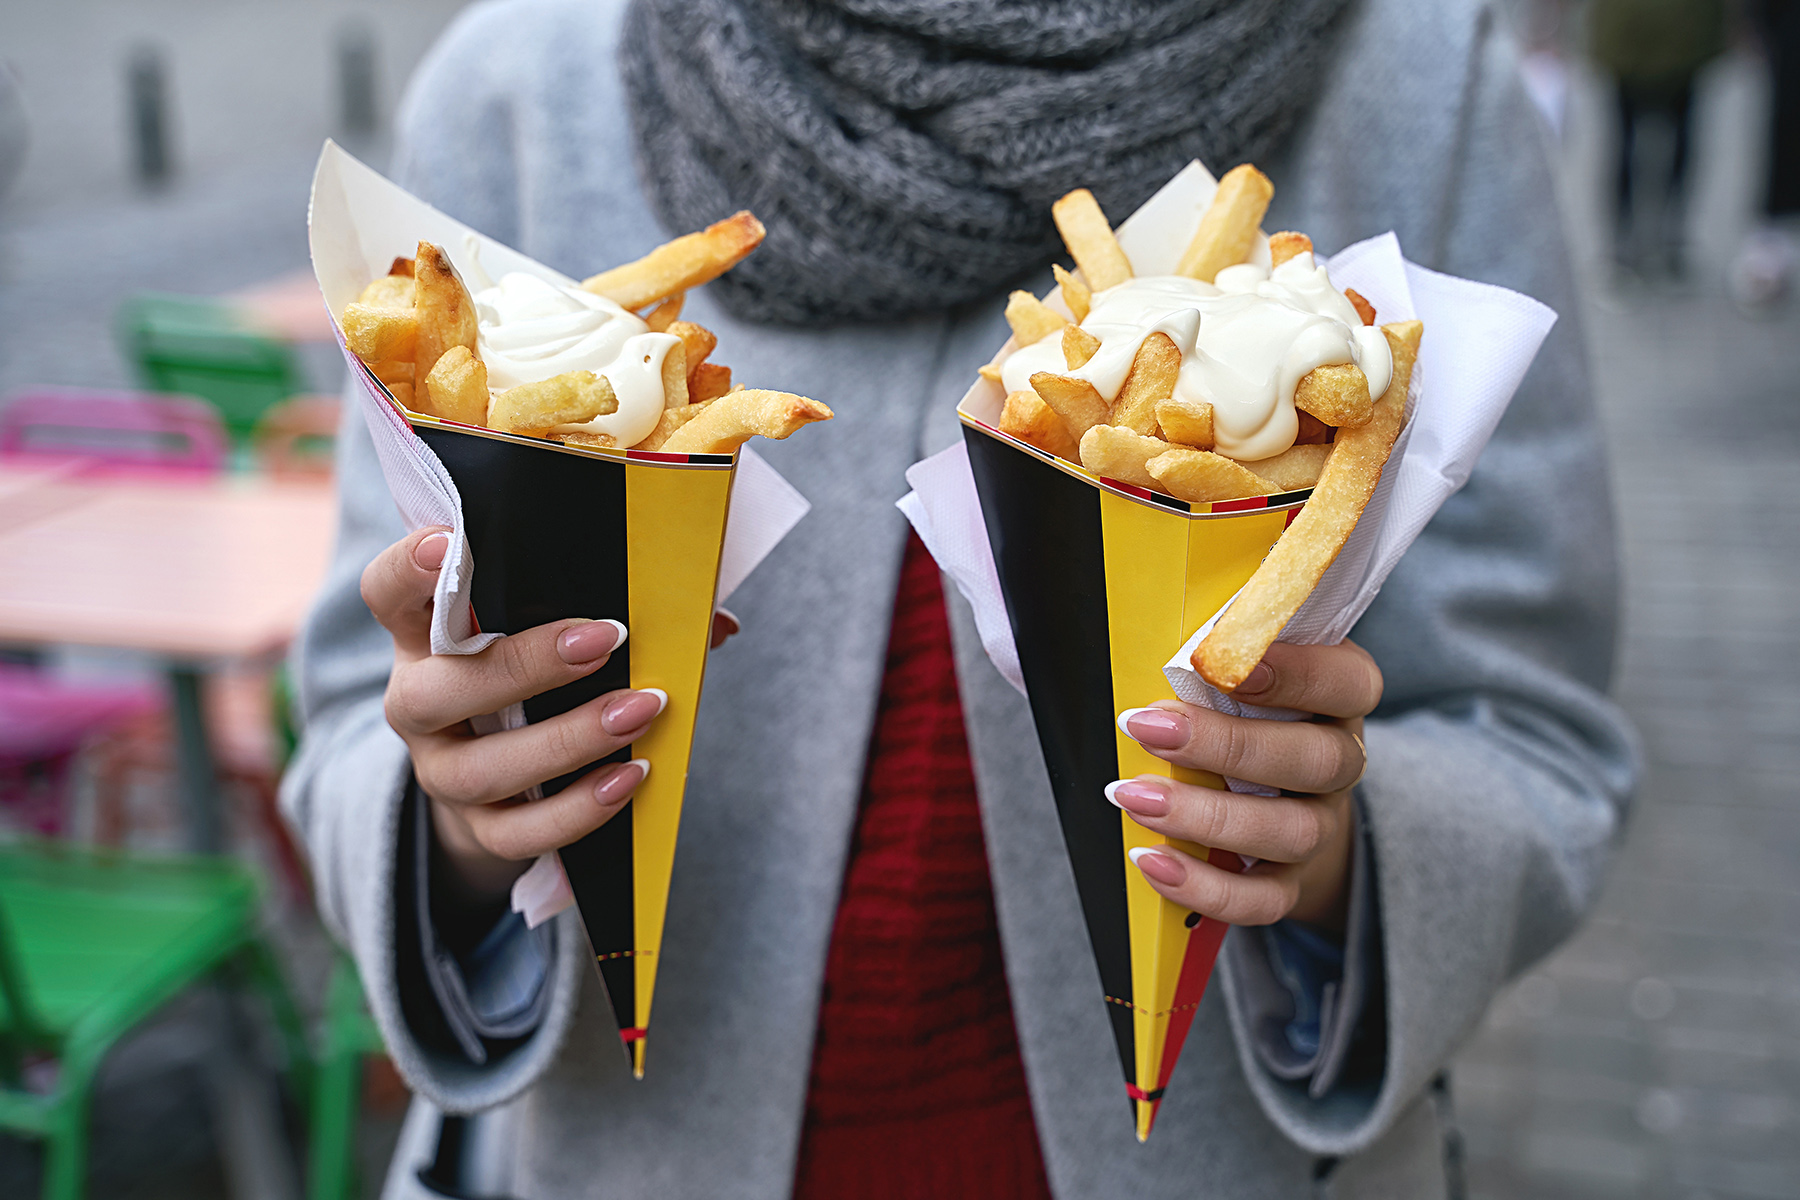 Surprising Facts About Belgium-French fries really come from Belgium!